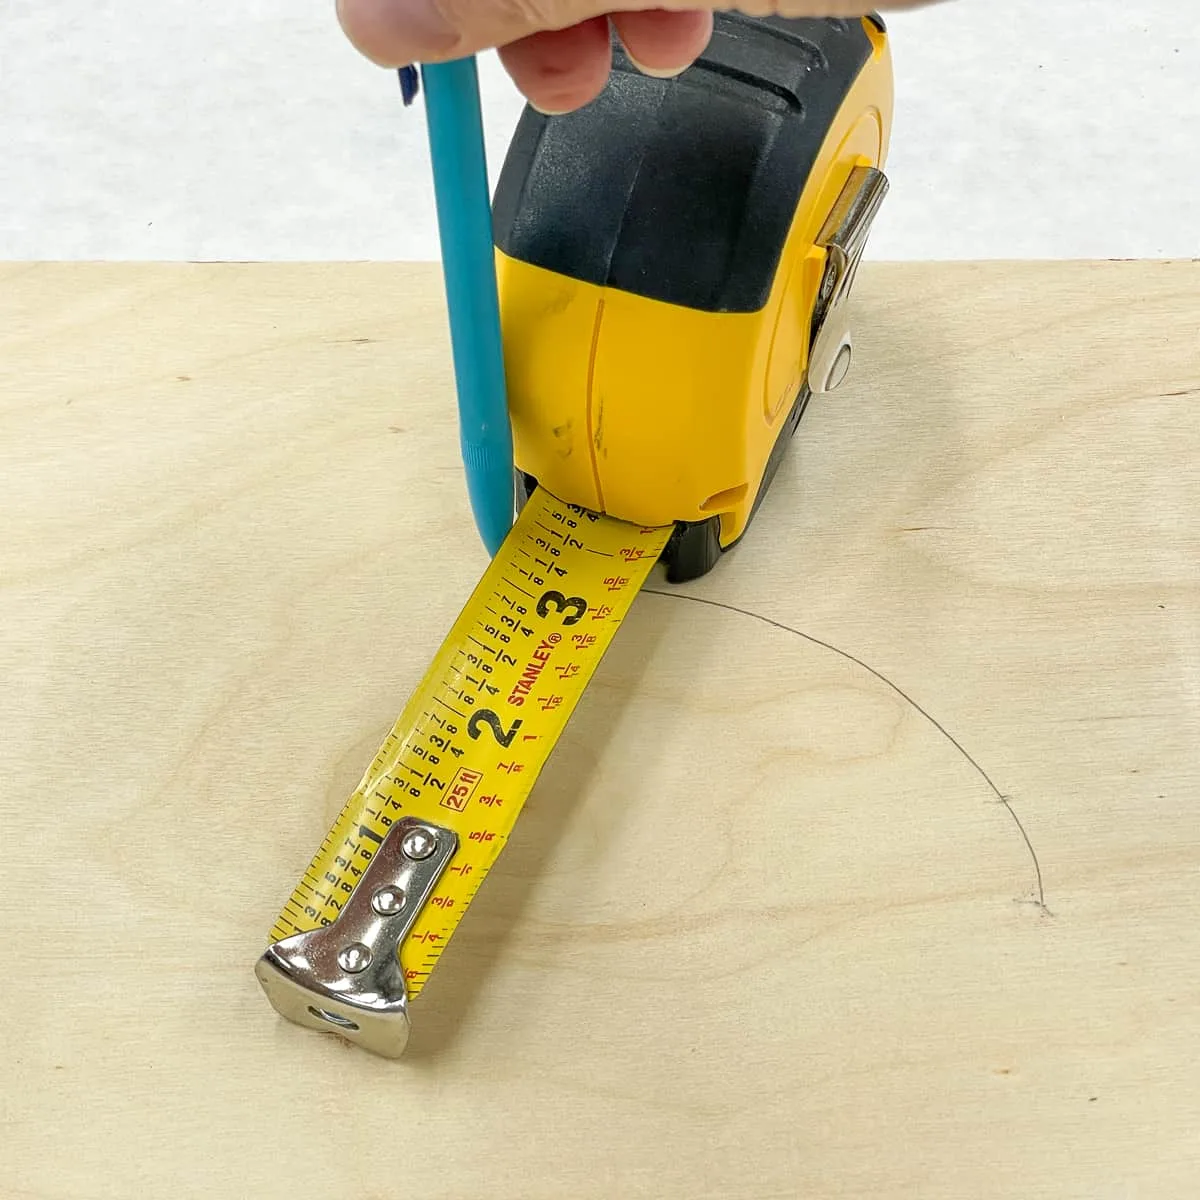 https://www.thehandymansdaughter.com/wp-content/uploads/2022/10/tape-measure-drawing-circle.jpg.webp